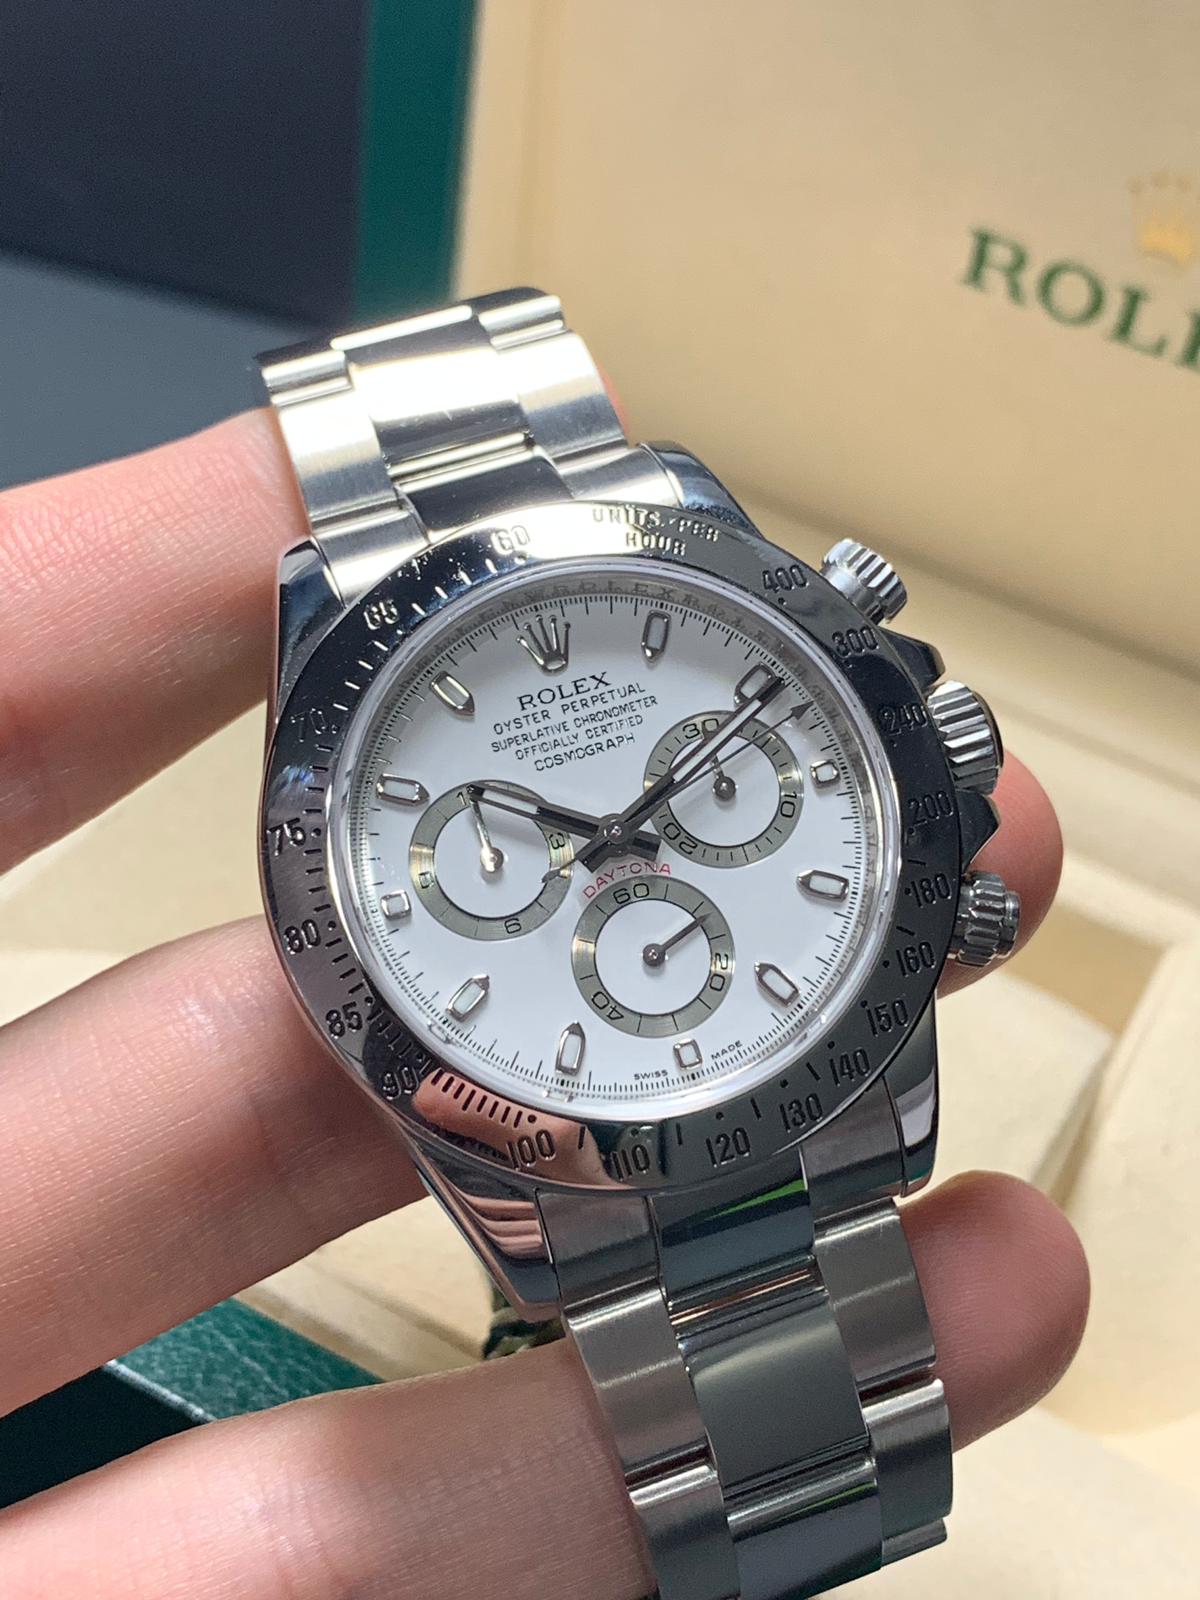 Rolex cosmograph daytona white dial 116520 APH - Carr Watches